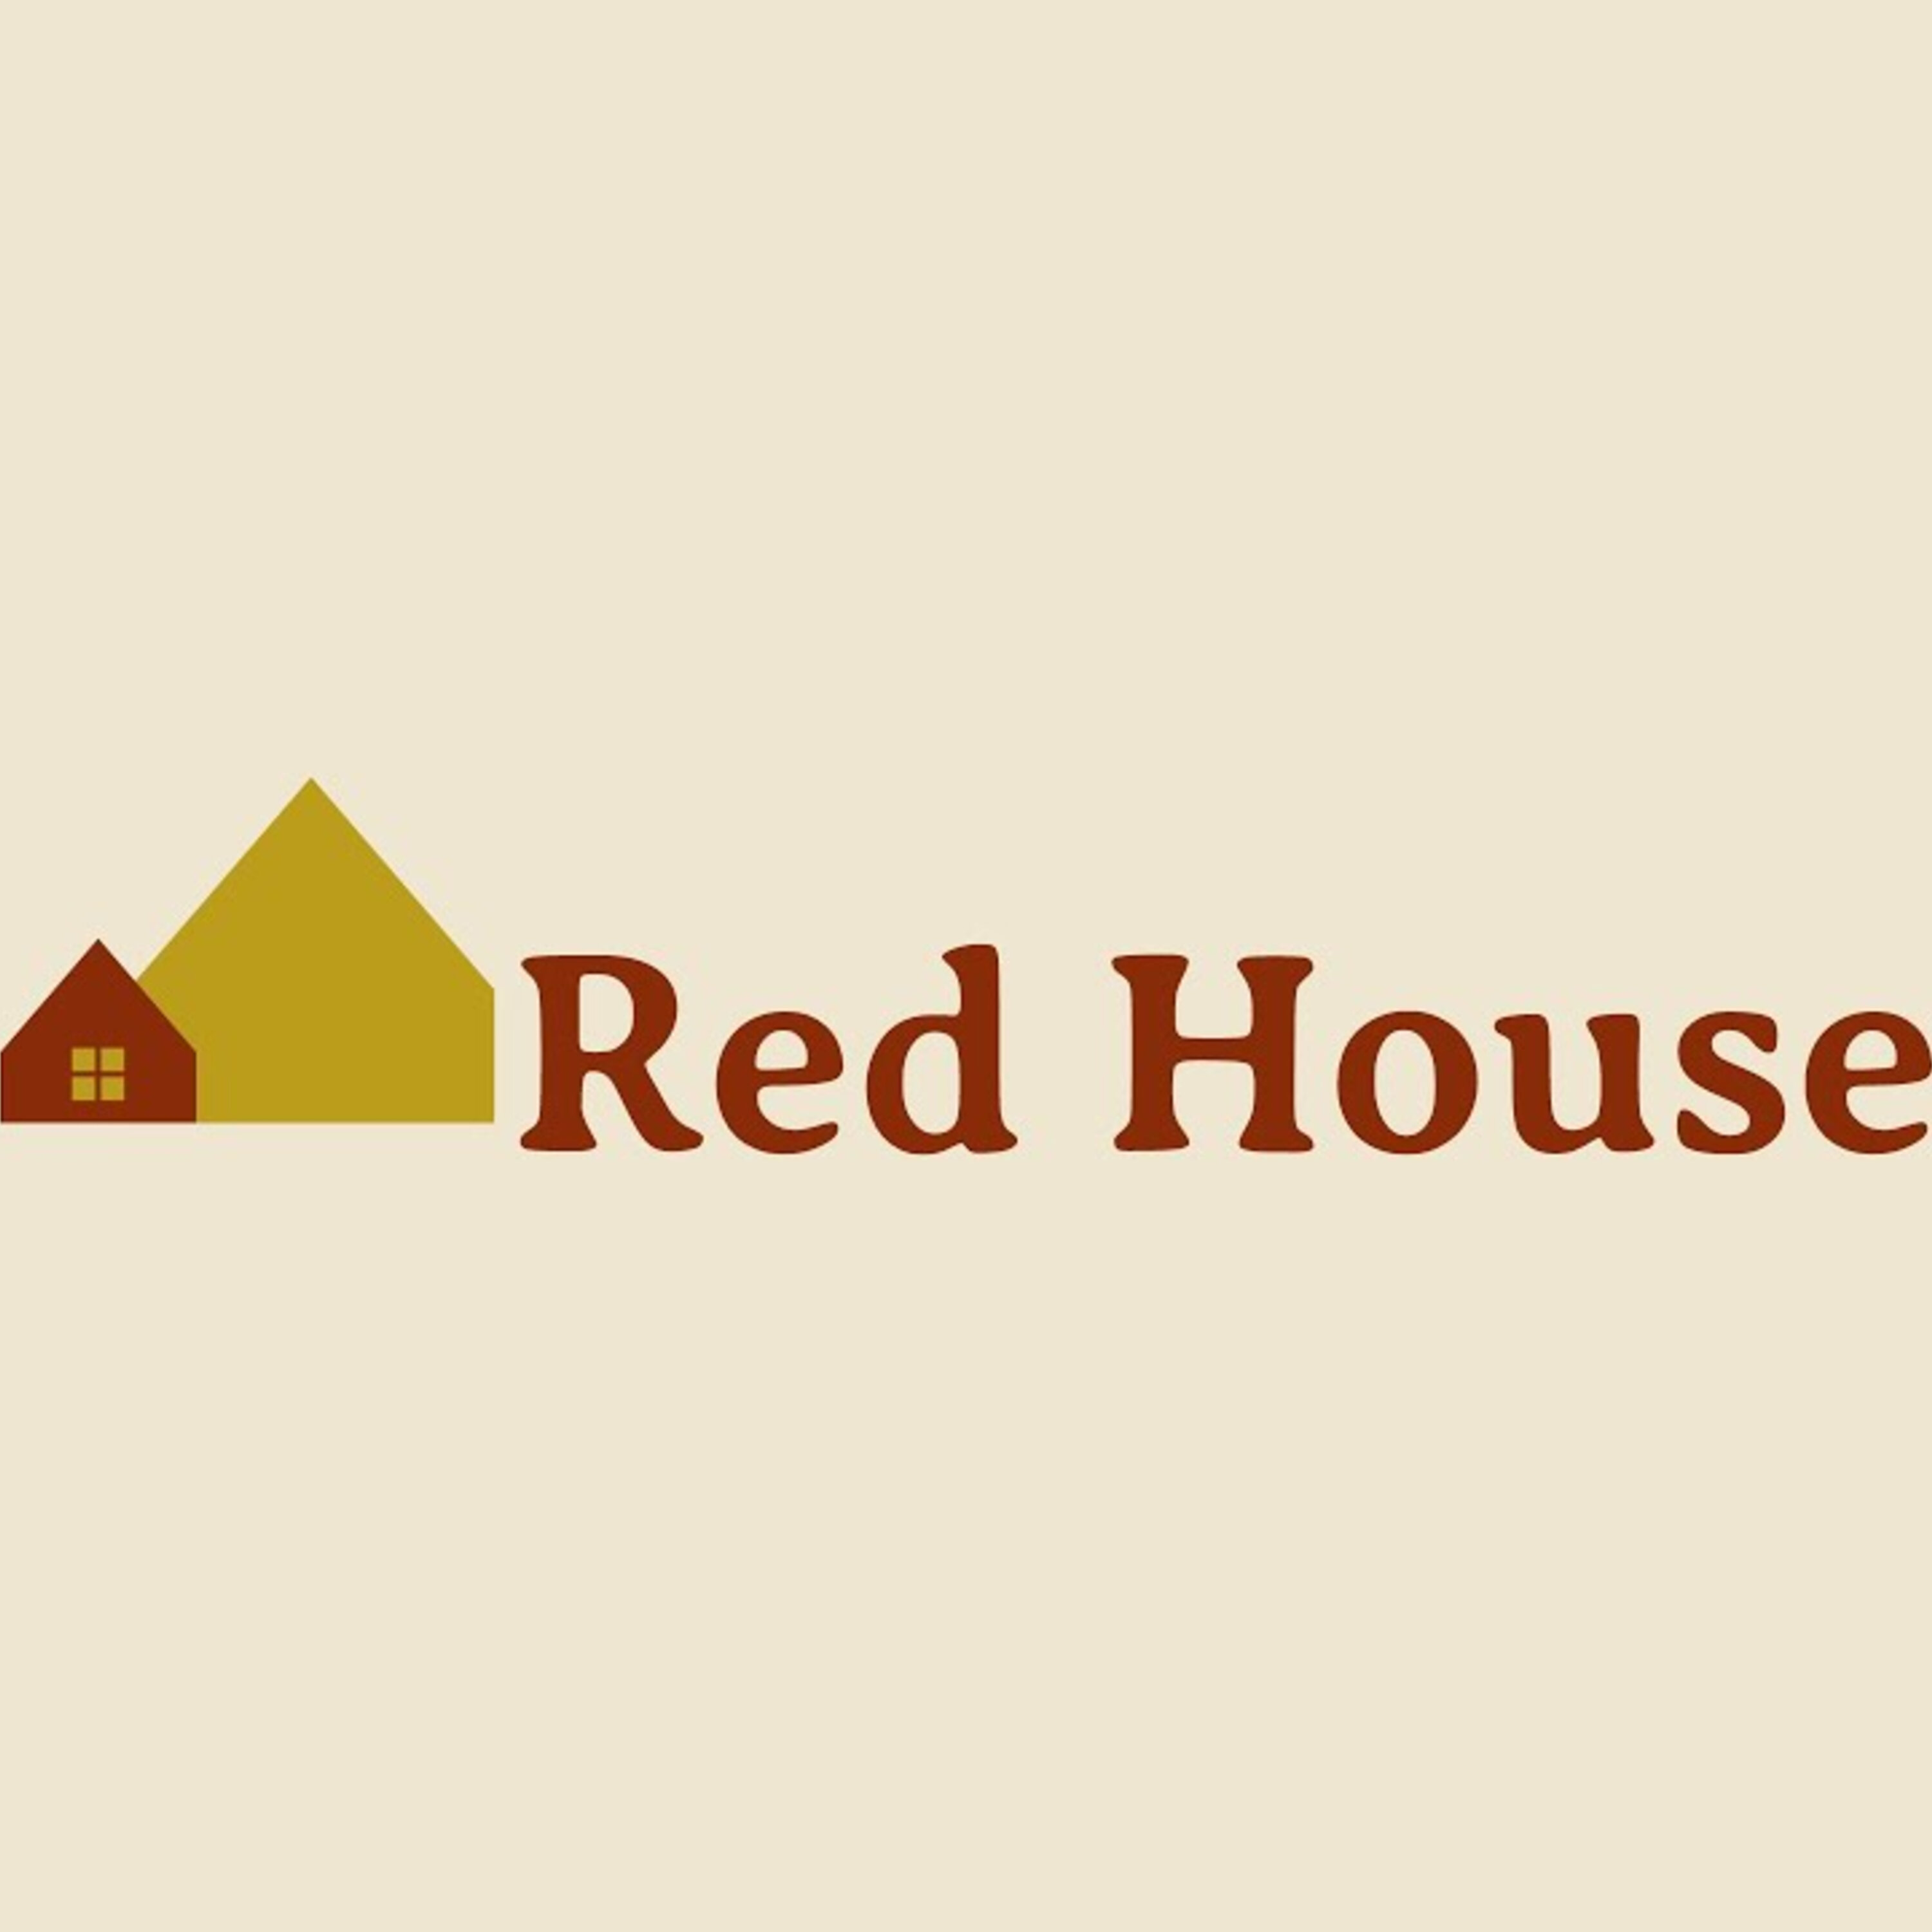 Red House with Tyler Nail - Eddie Huffman Image